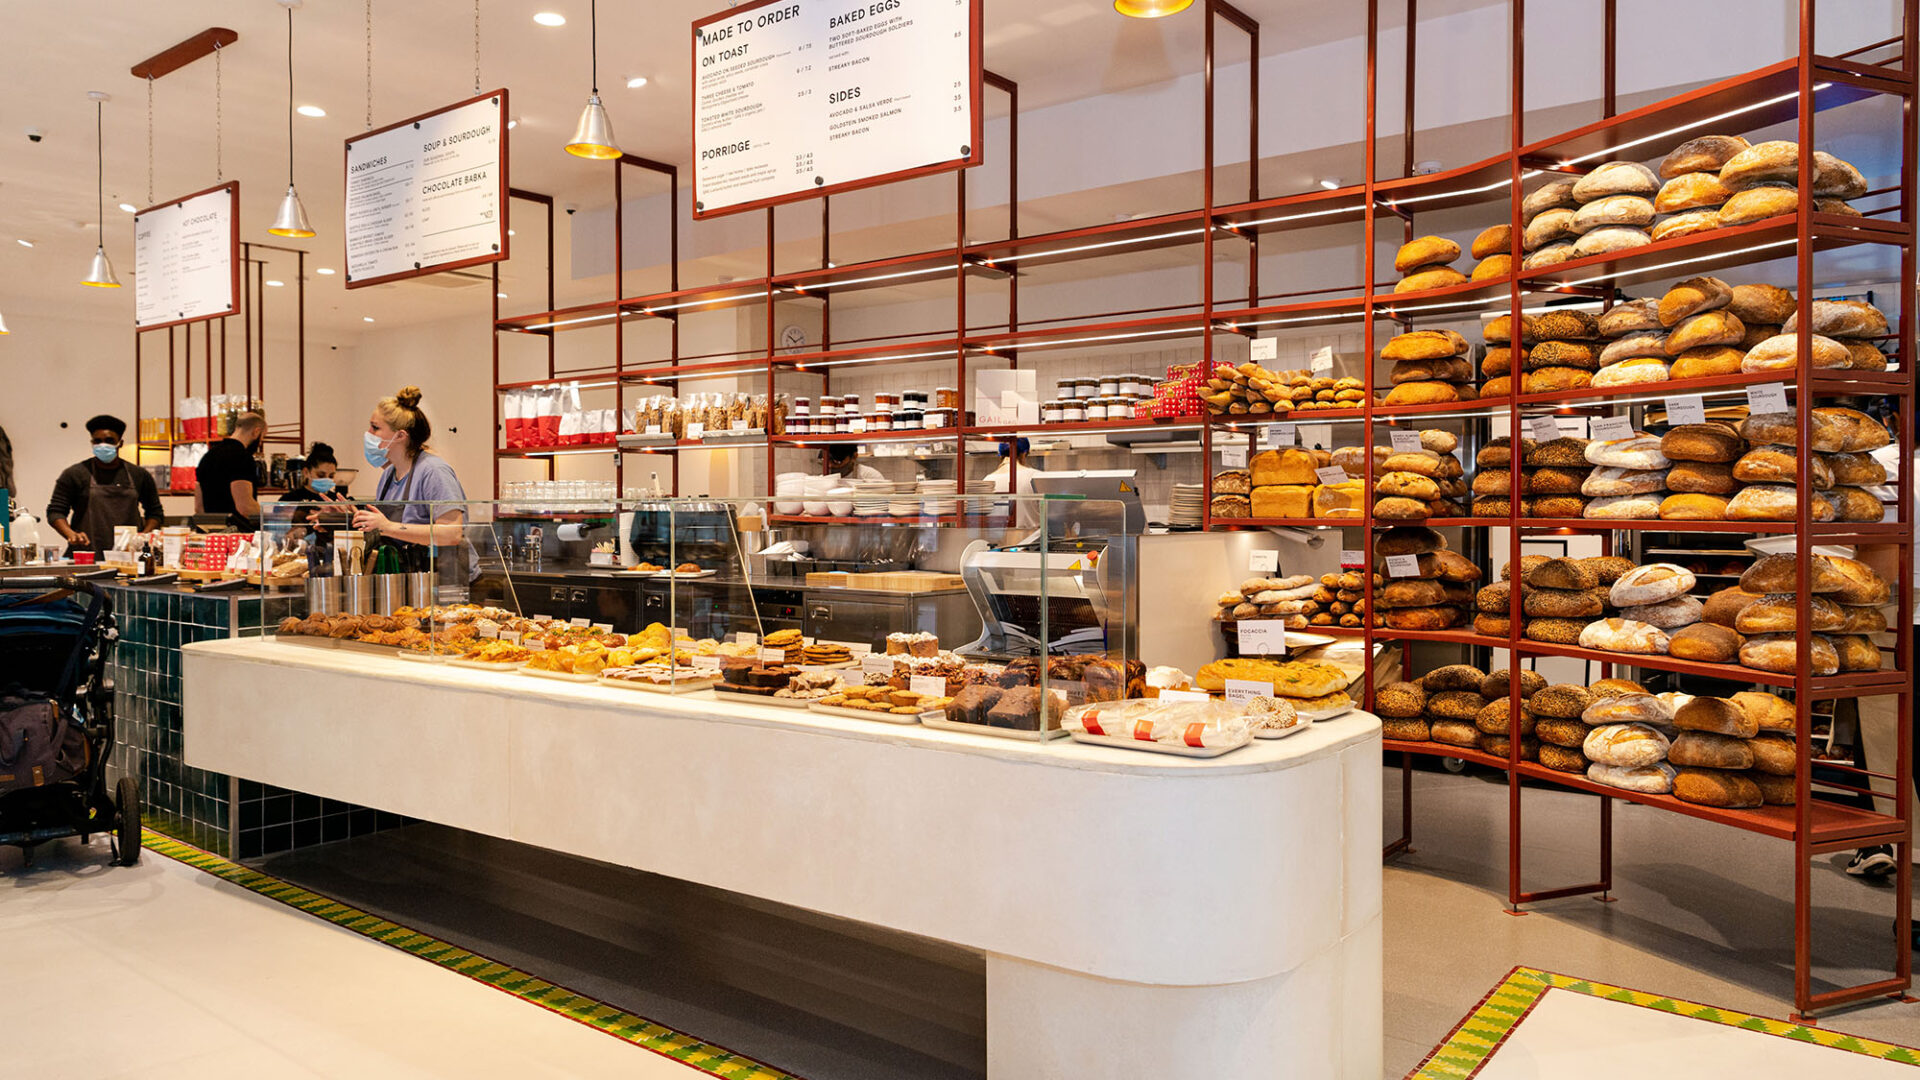 Bakery Counter at Gail's, King's Cross